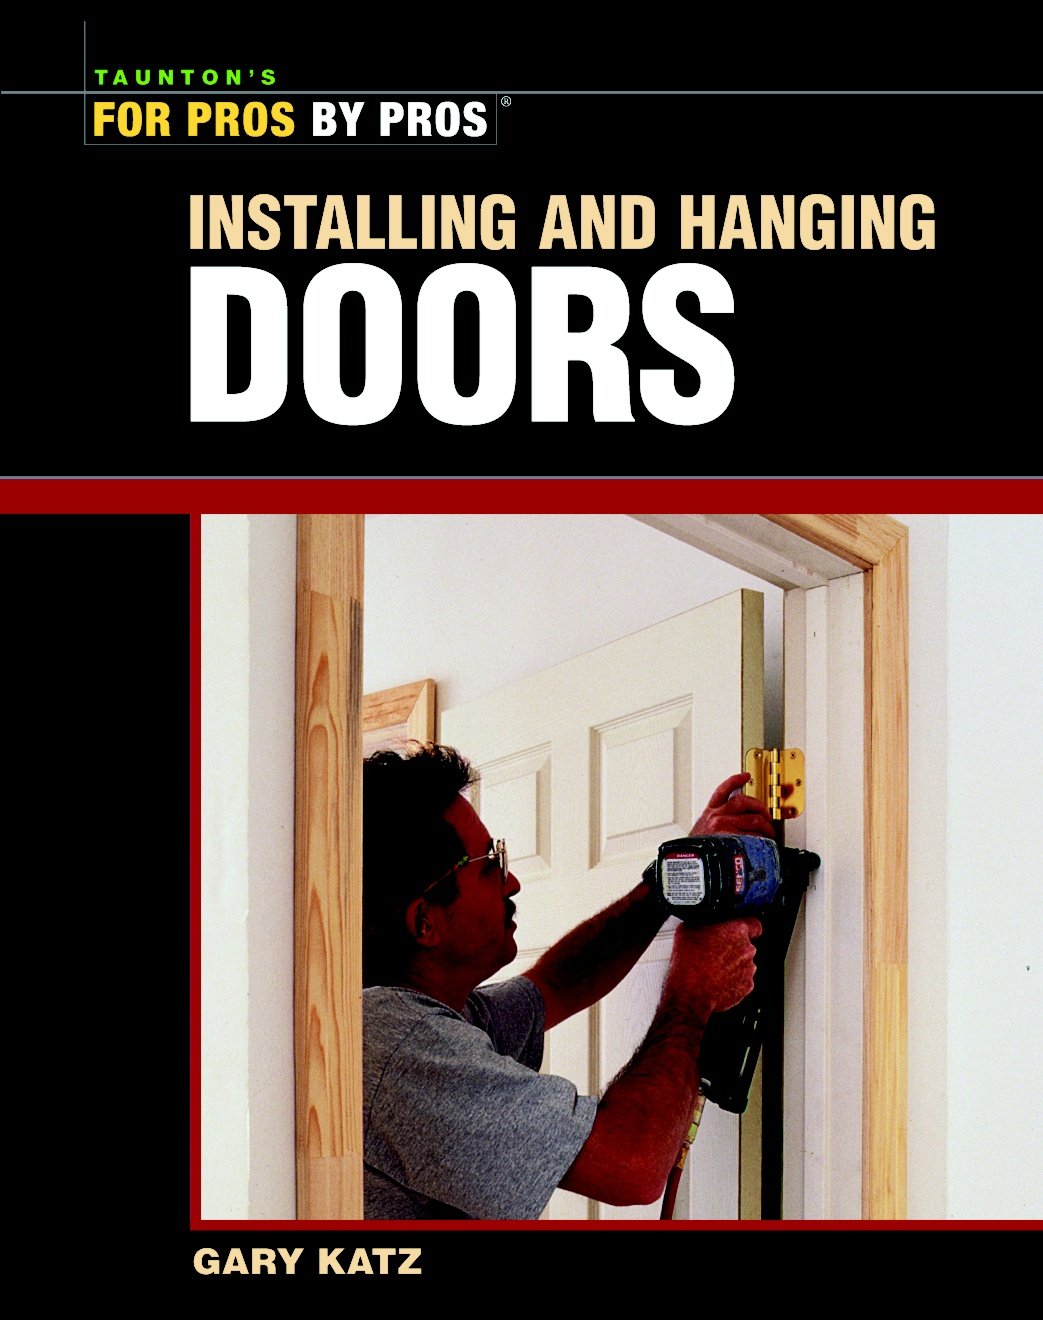 Installing and Hanging Doors (For Pros By Pros)